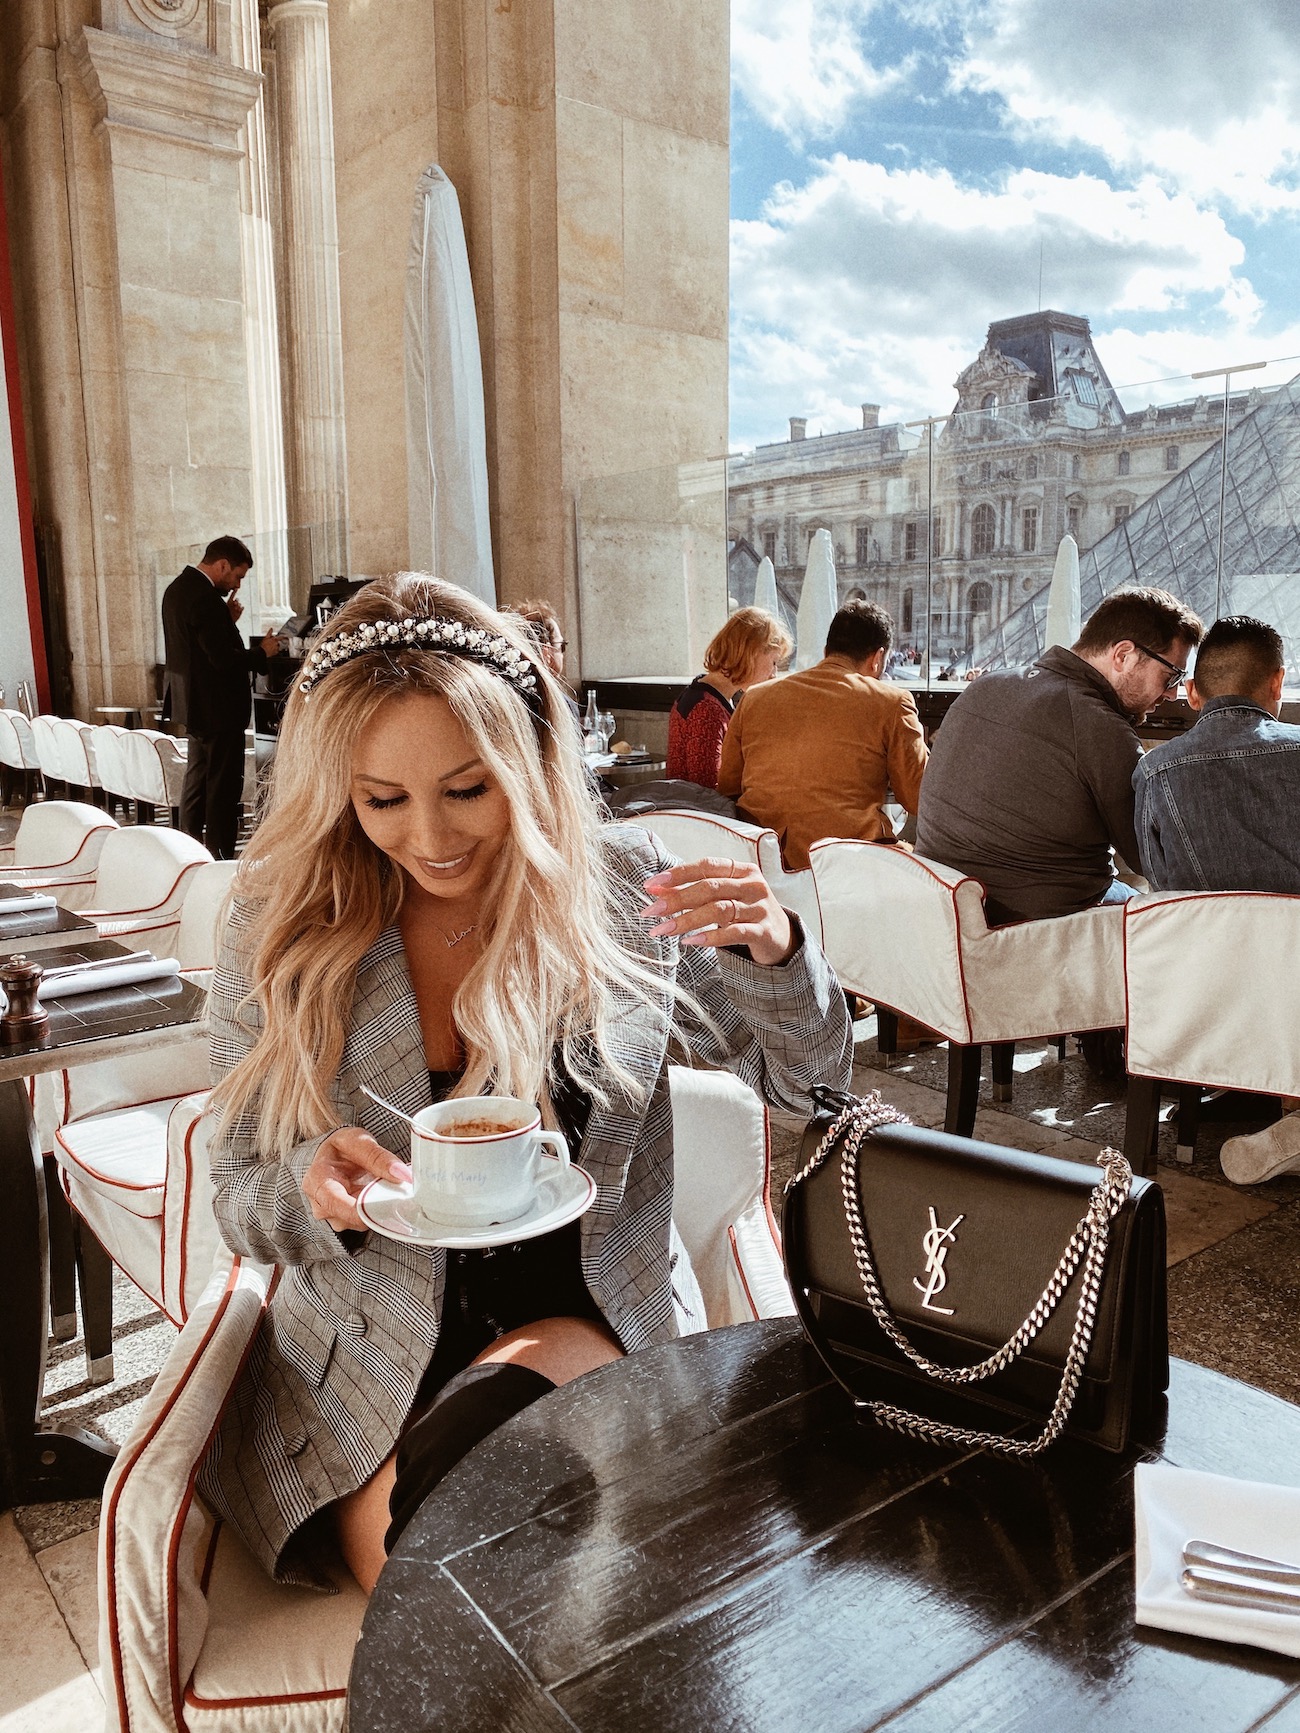 Cafes To Visit in Paris | Paris Cafes | Le Cafe Marly | Blondie in the City by Hayley Larue